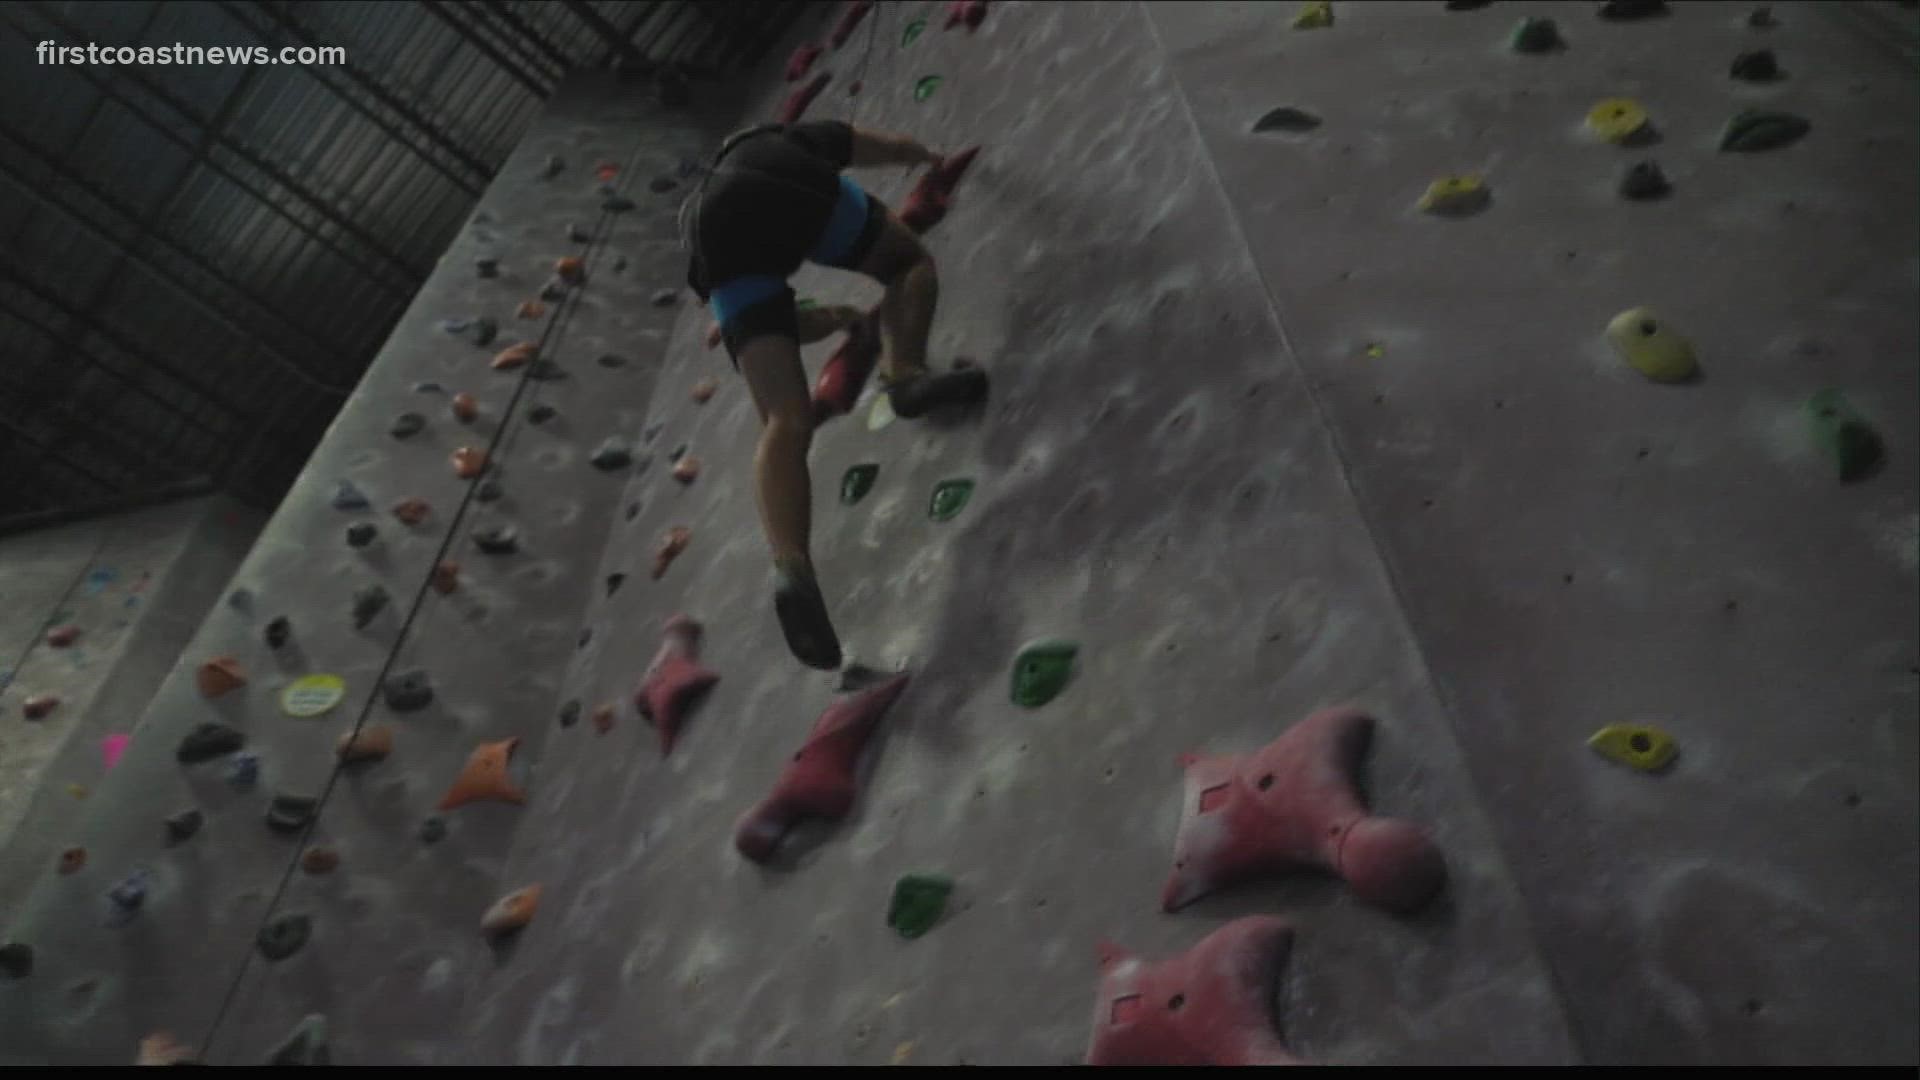 Sport climbing continues to grow in popularity as it debuts at Tokyo 2020. Jacksonville enthusiasts say it's a sport unlike any other.